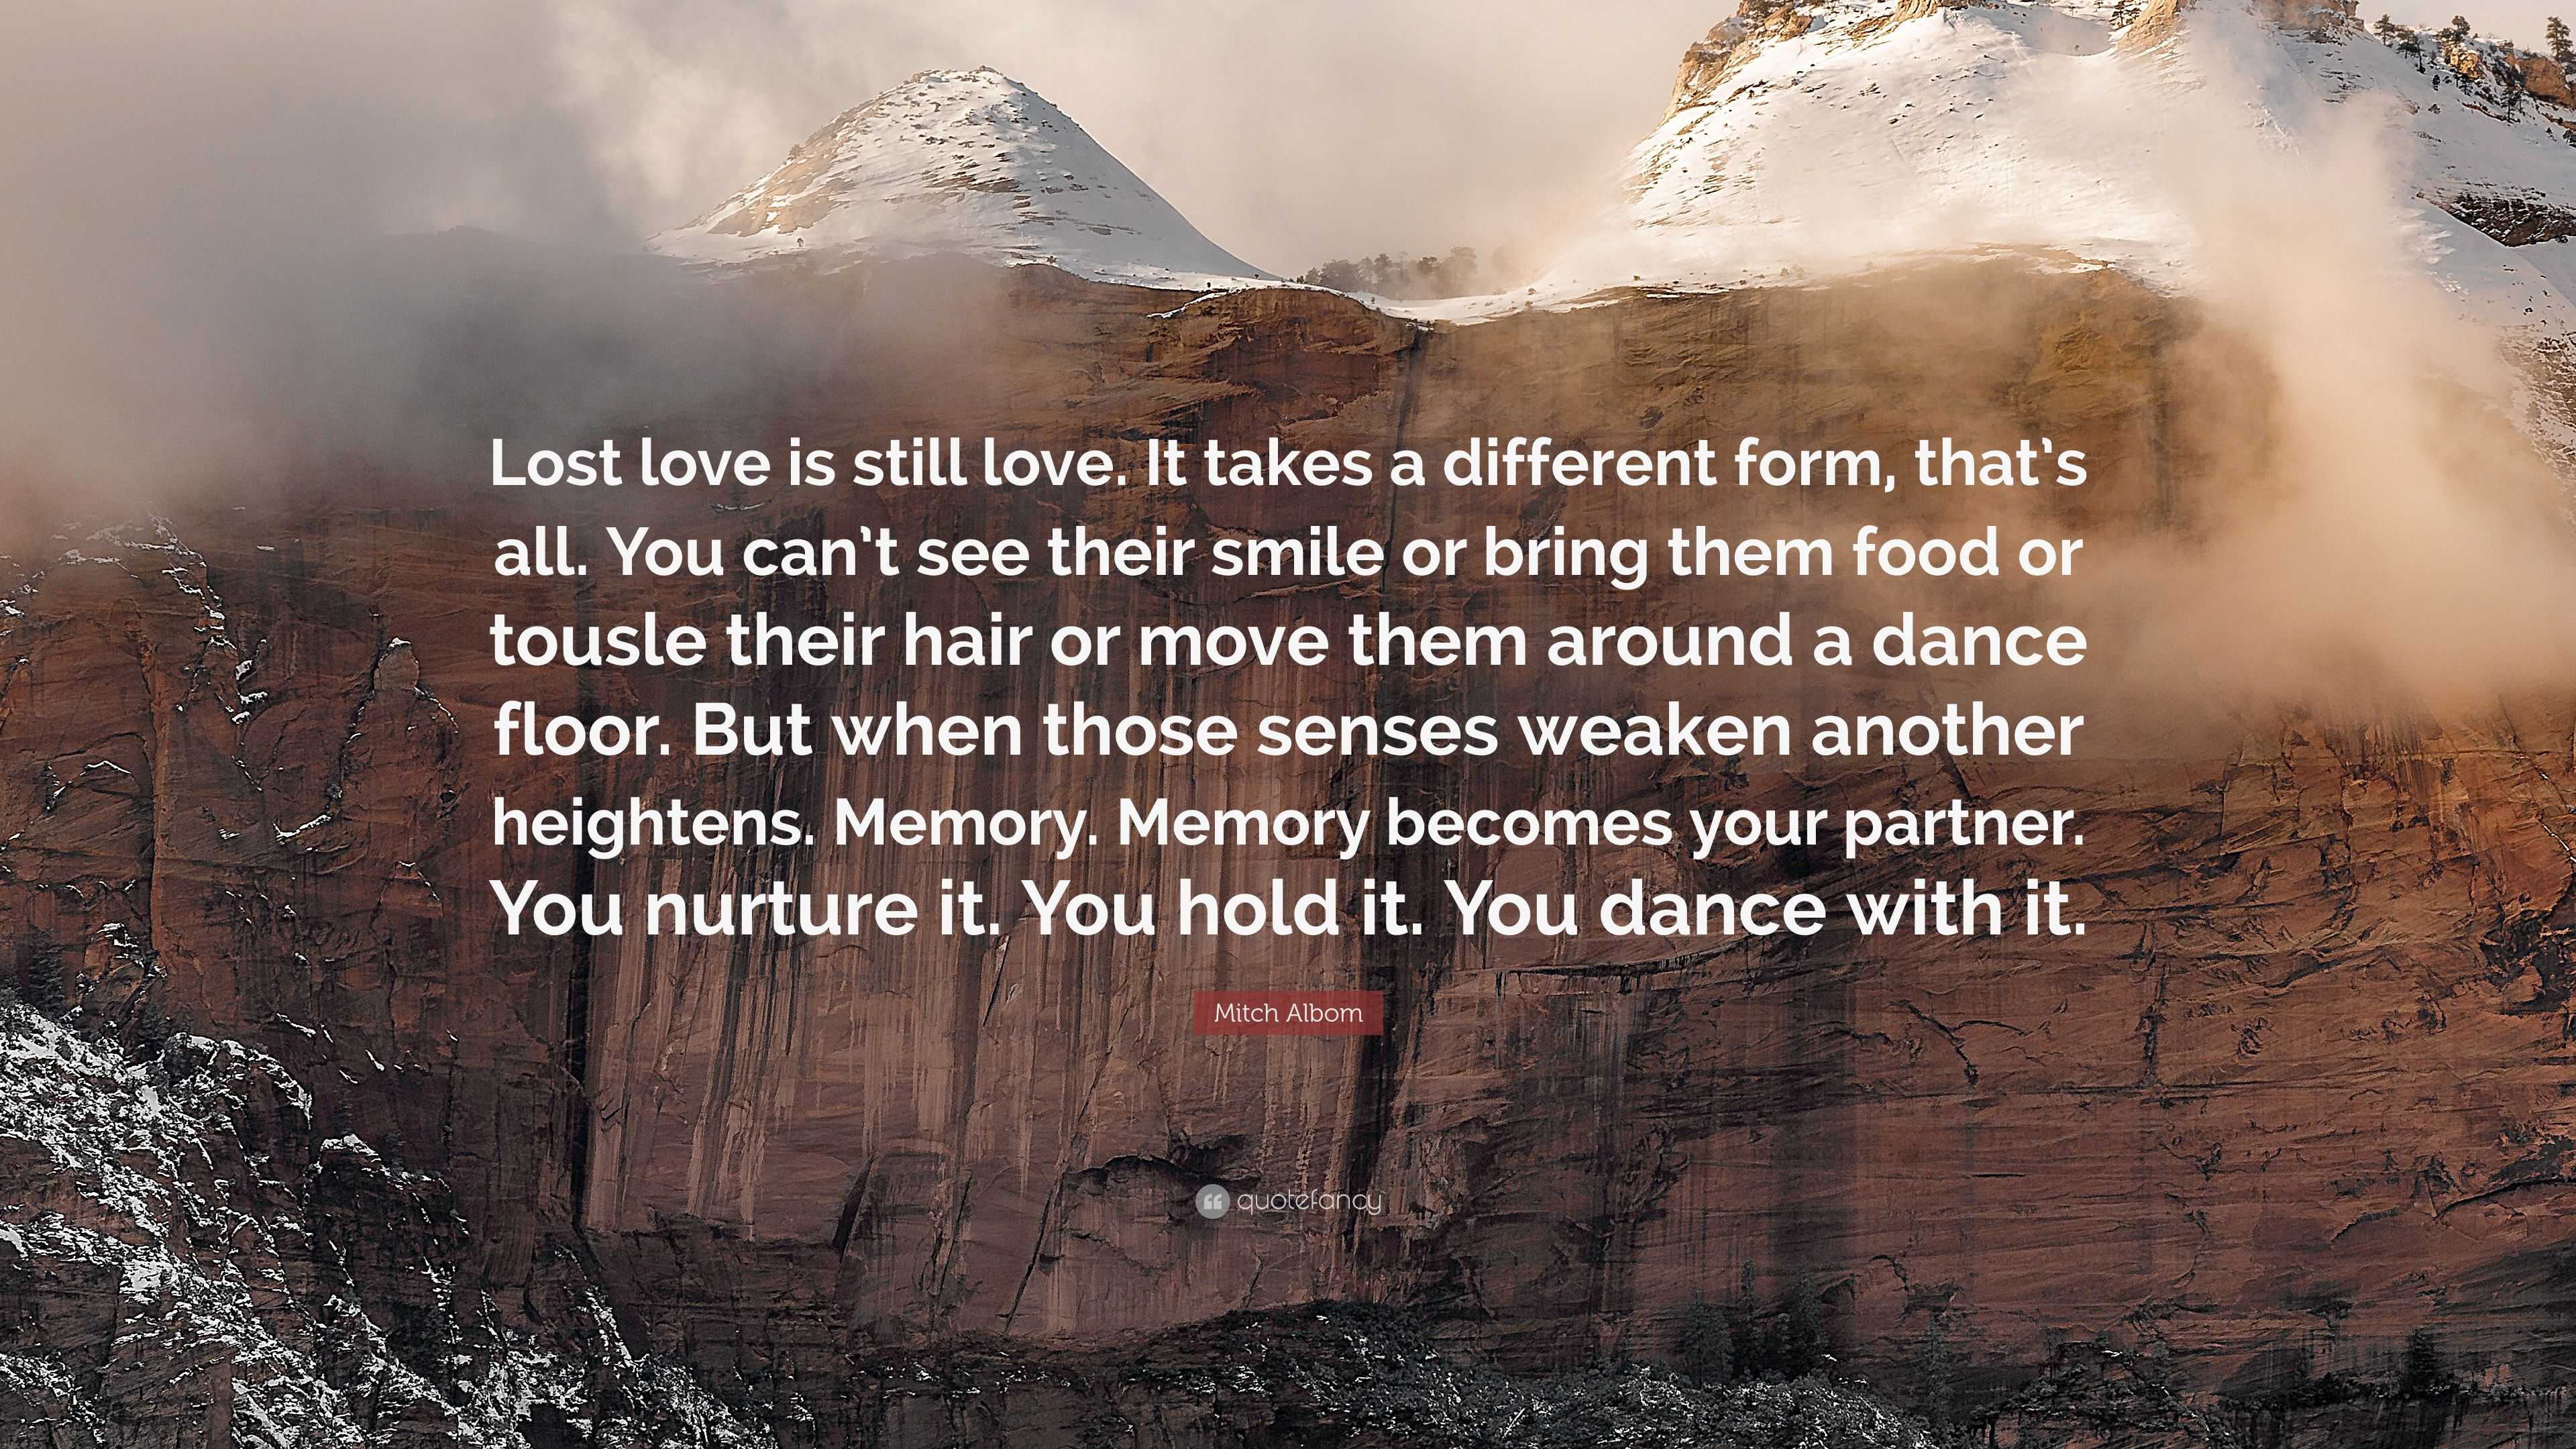 Mitch Albom Quote “lost Love Is Still Love It Takes A Different Form